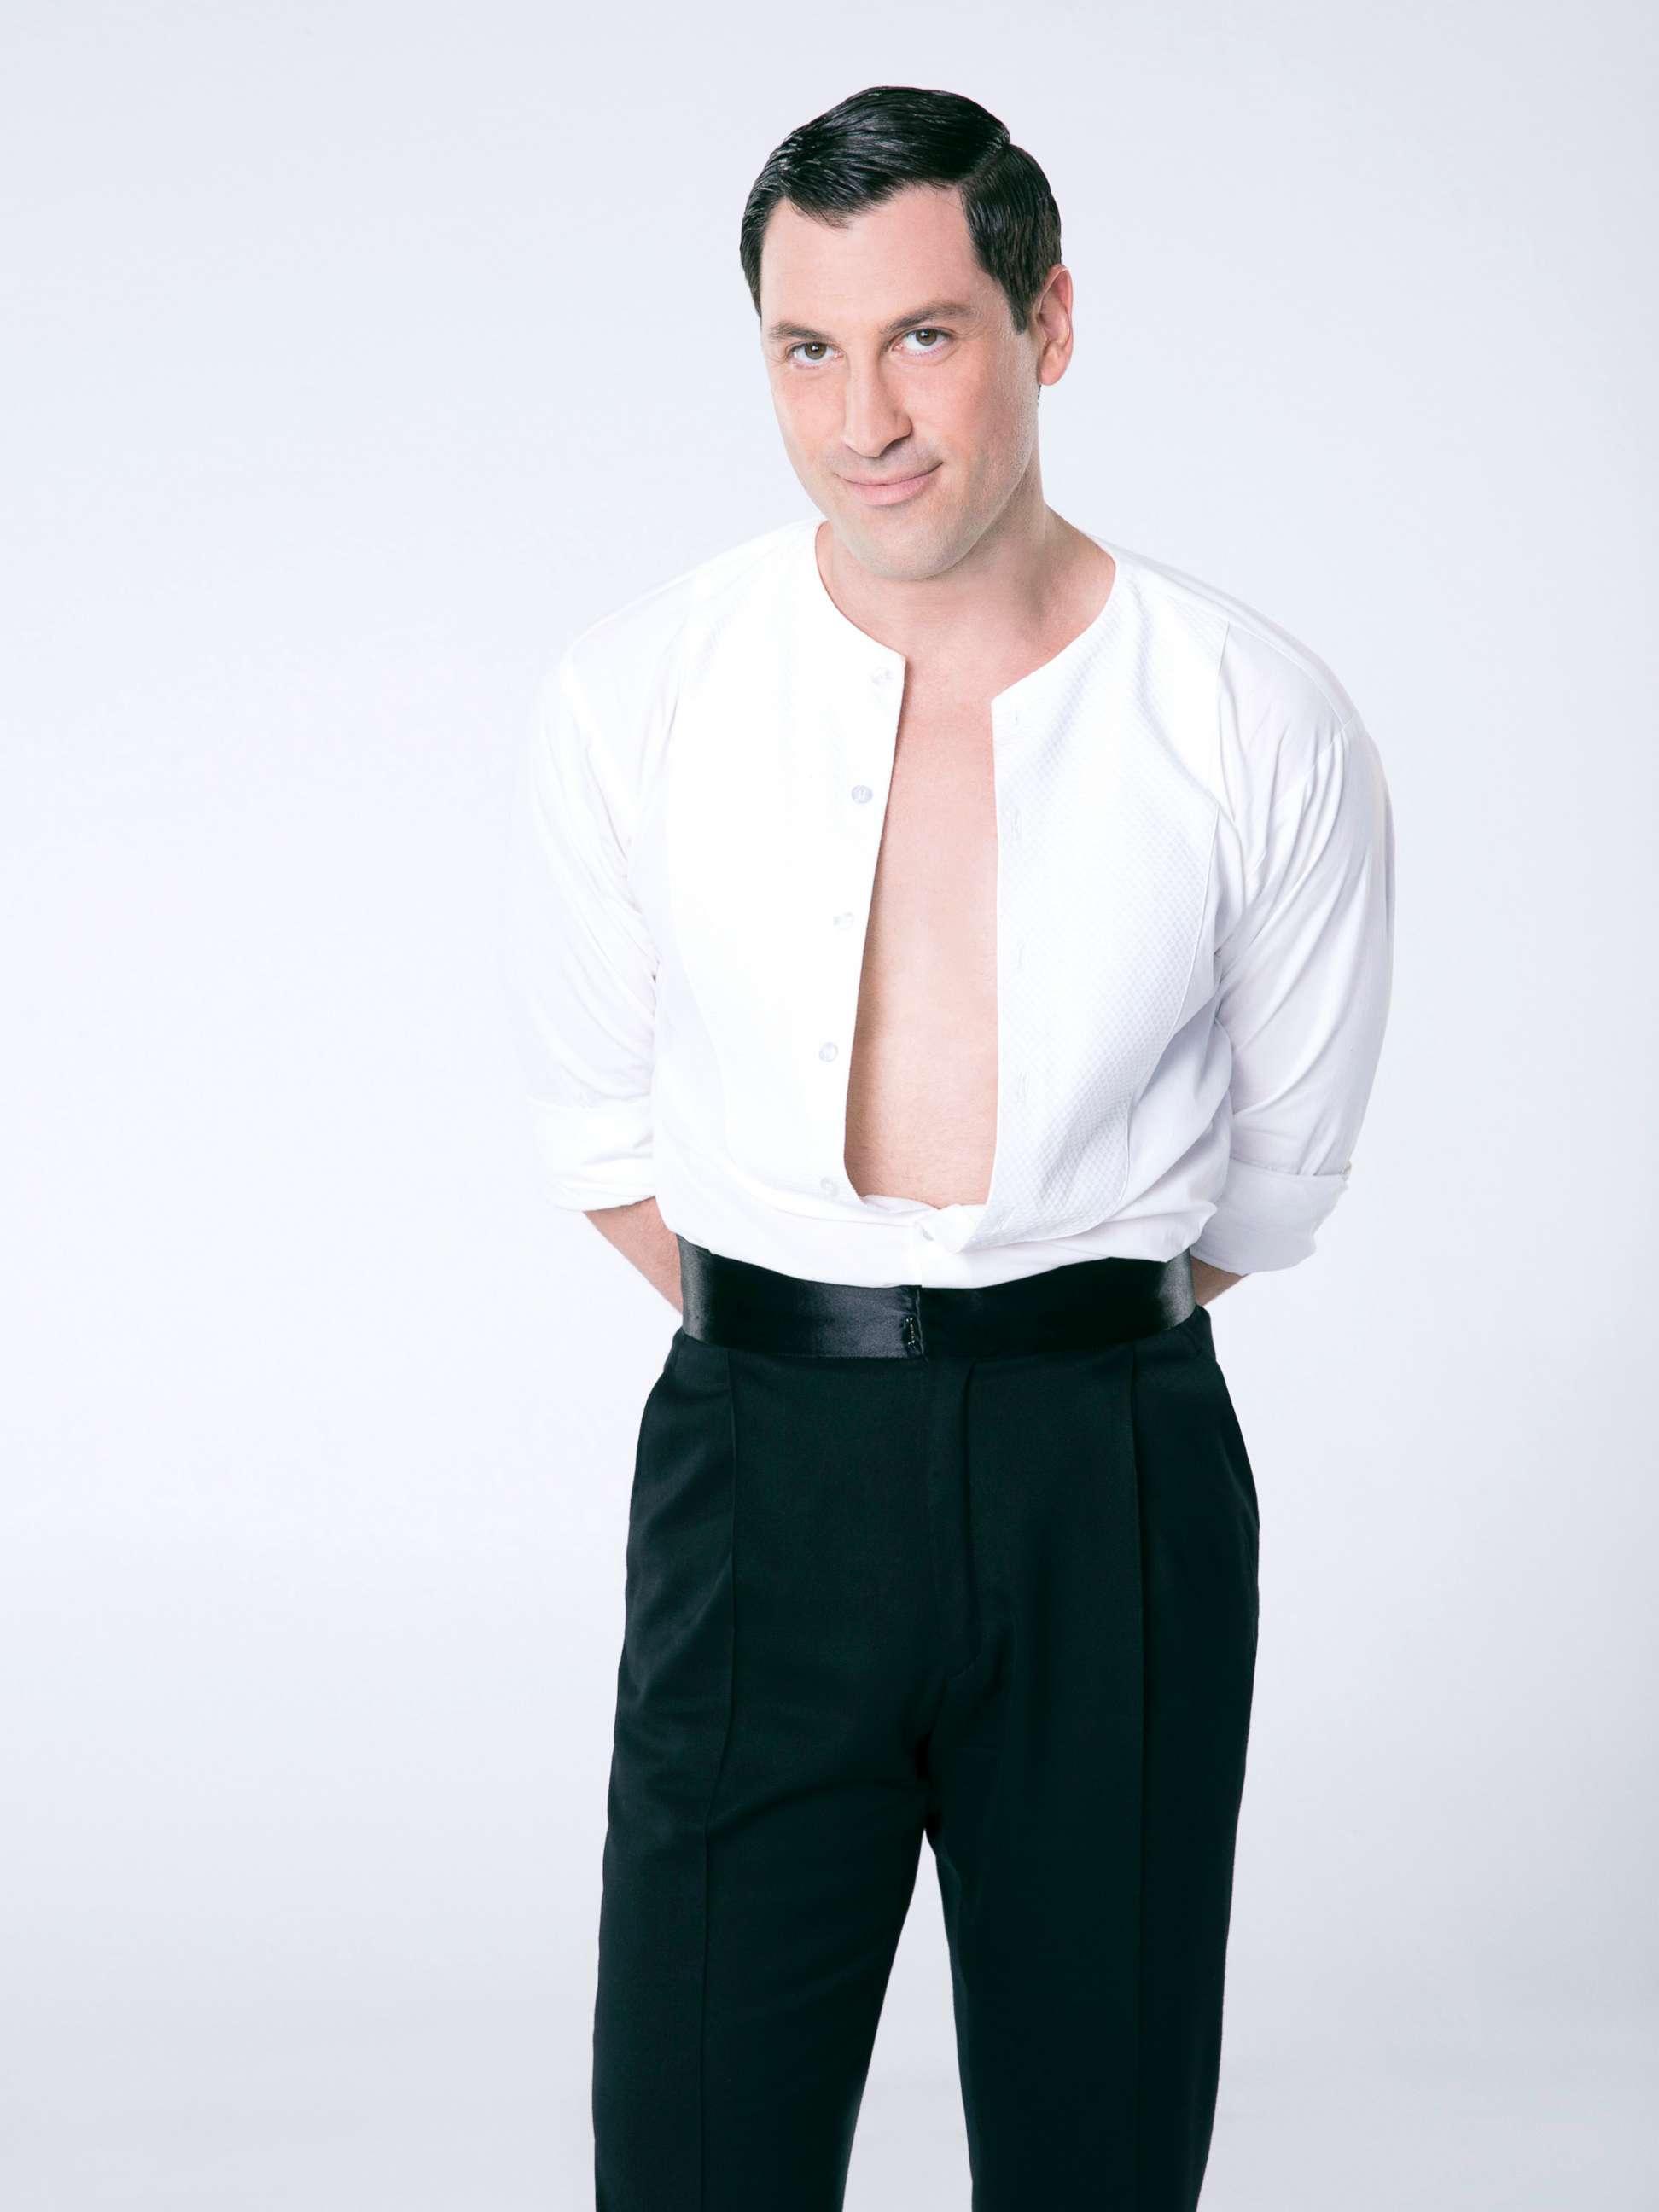 PHOTO: Pro dancer Maksim Chmerkovskiy will appear on "Dancing With The Stars."